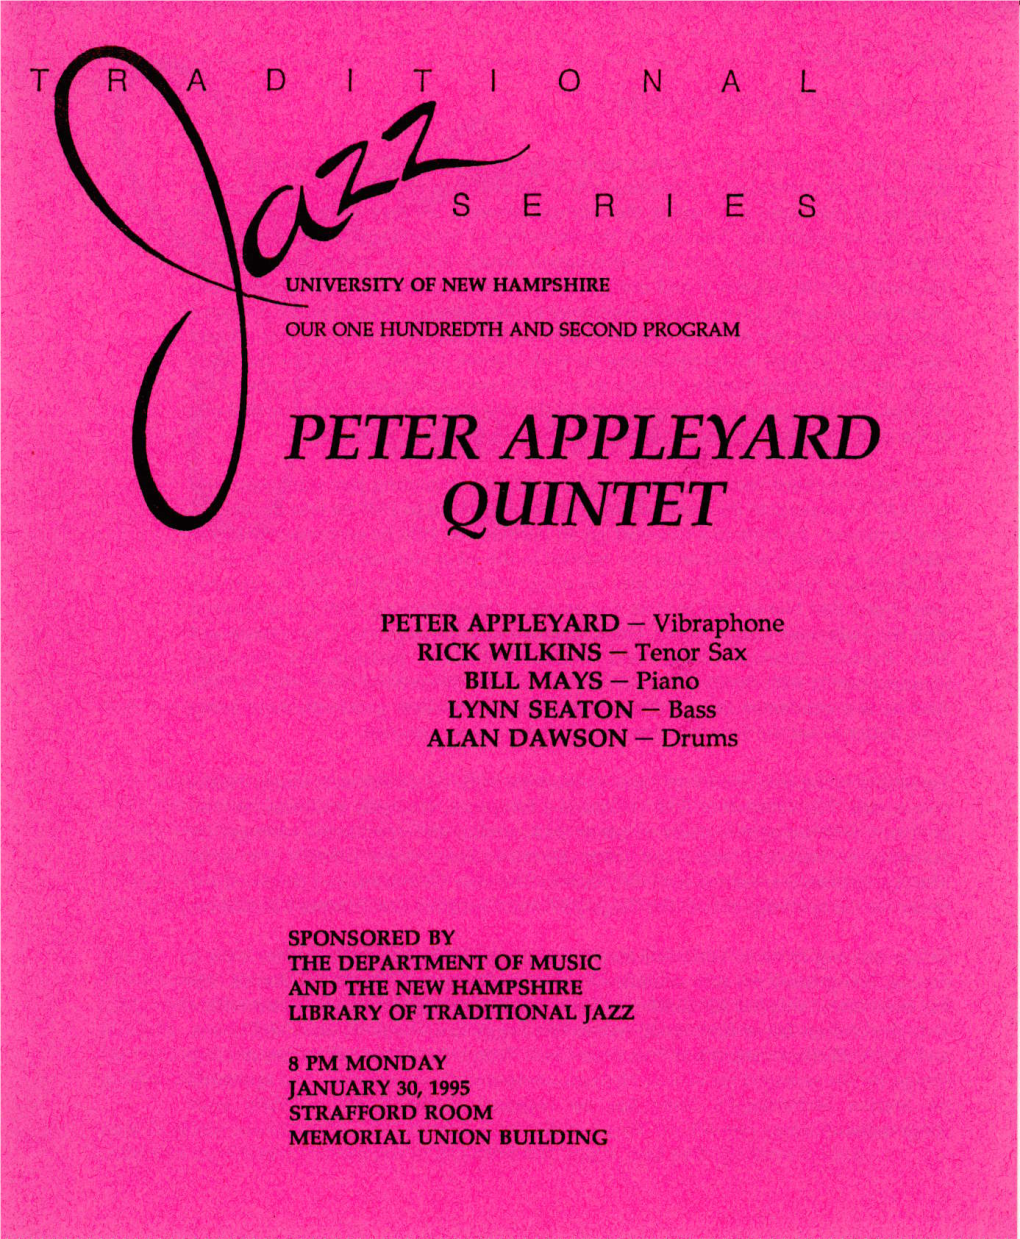 Peter Appleyard First Appearedon Our Seriesin March of 1992He Introduced Us to Jay Leonhart and Johnbunch, As Well As Reacquaintingus with Dennismackrel